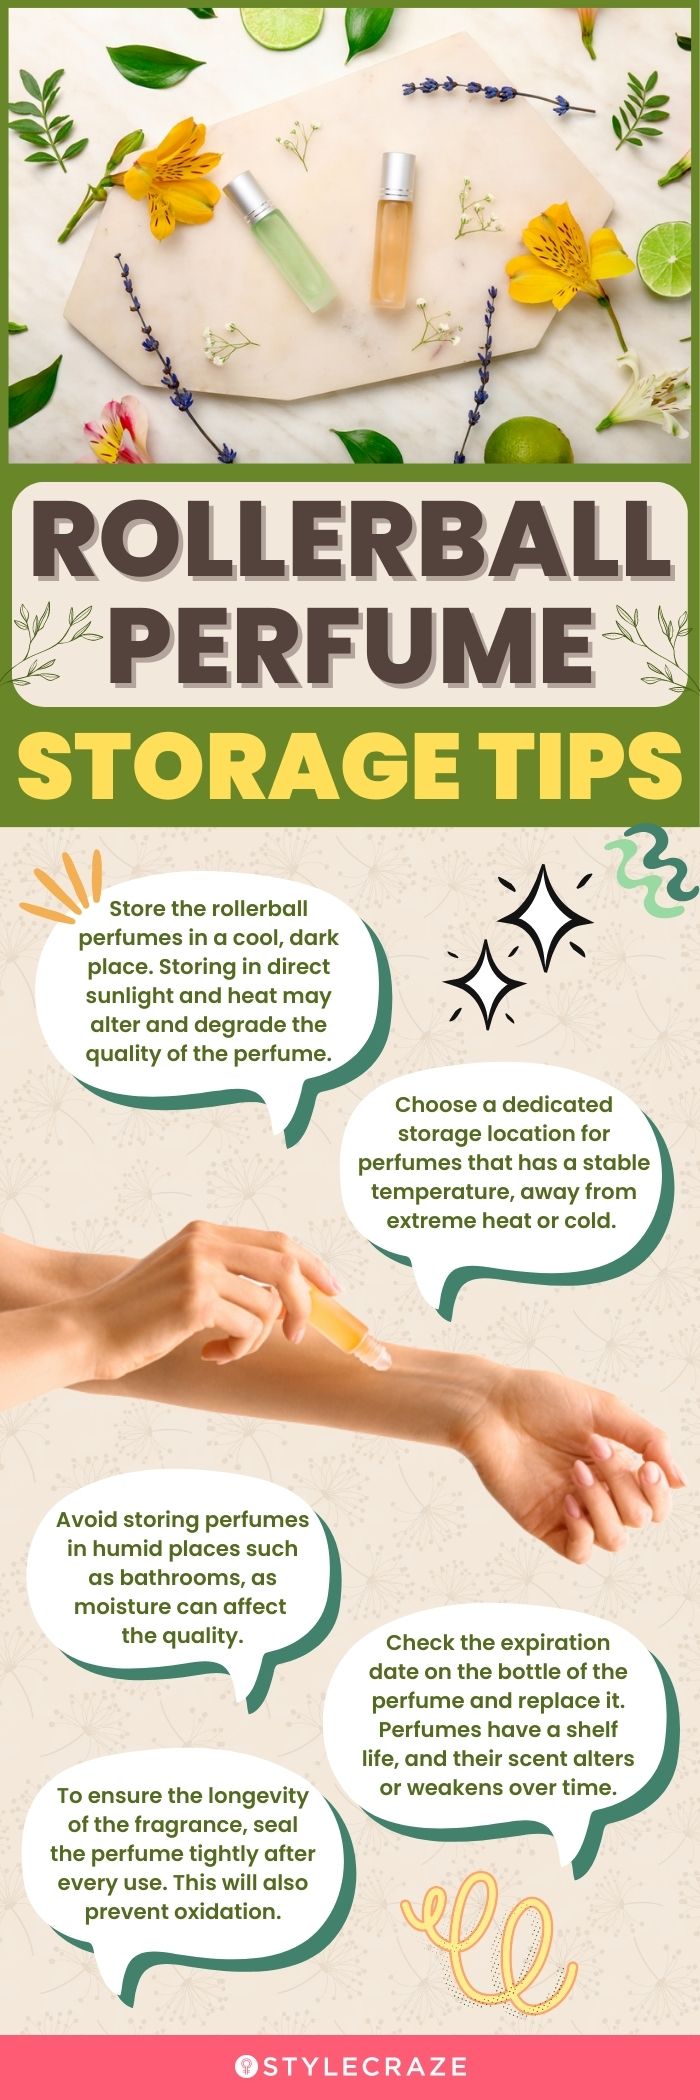 Rollerball Perfume Storage Tips (infographic)